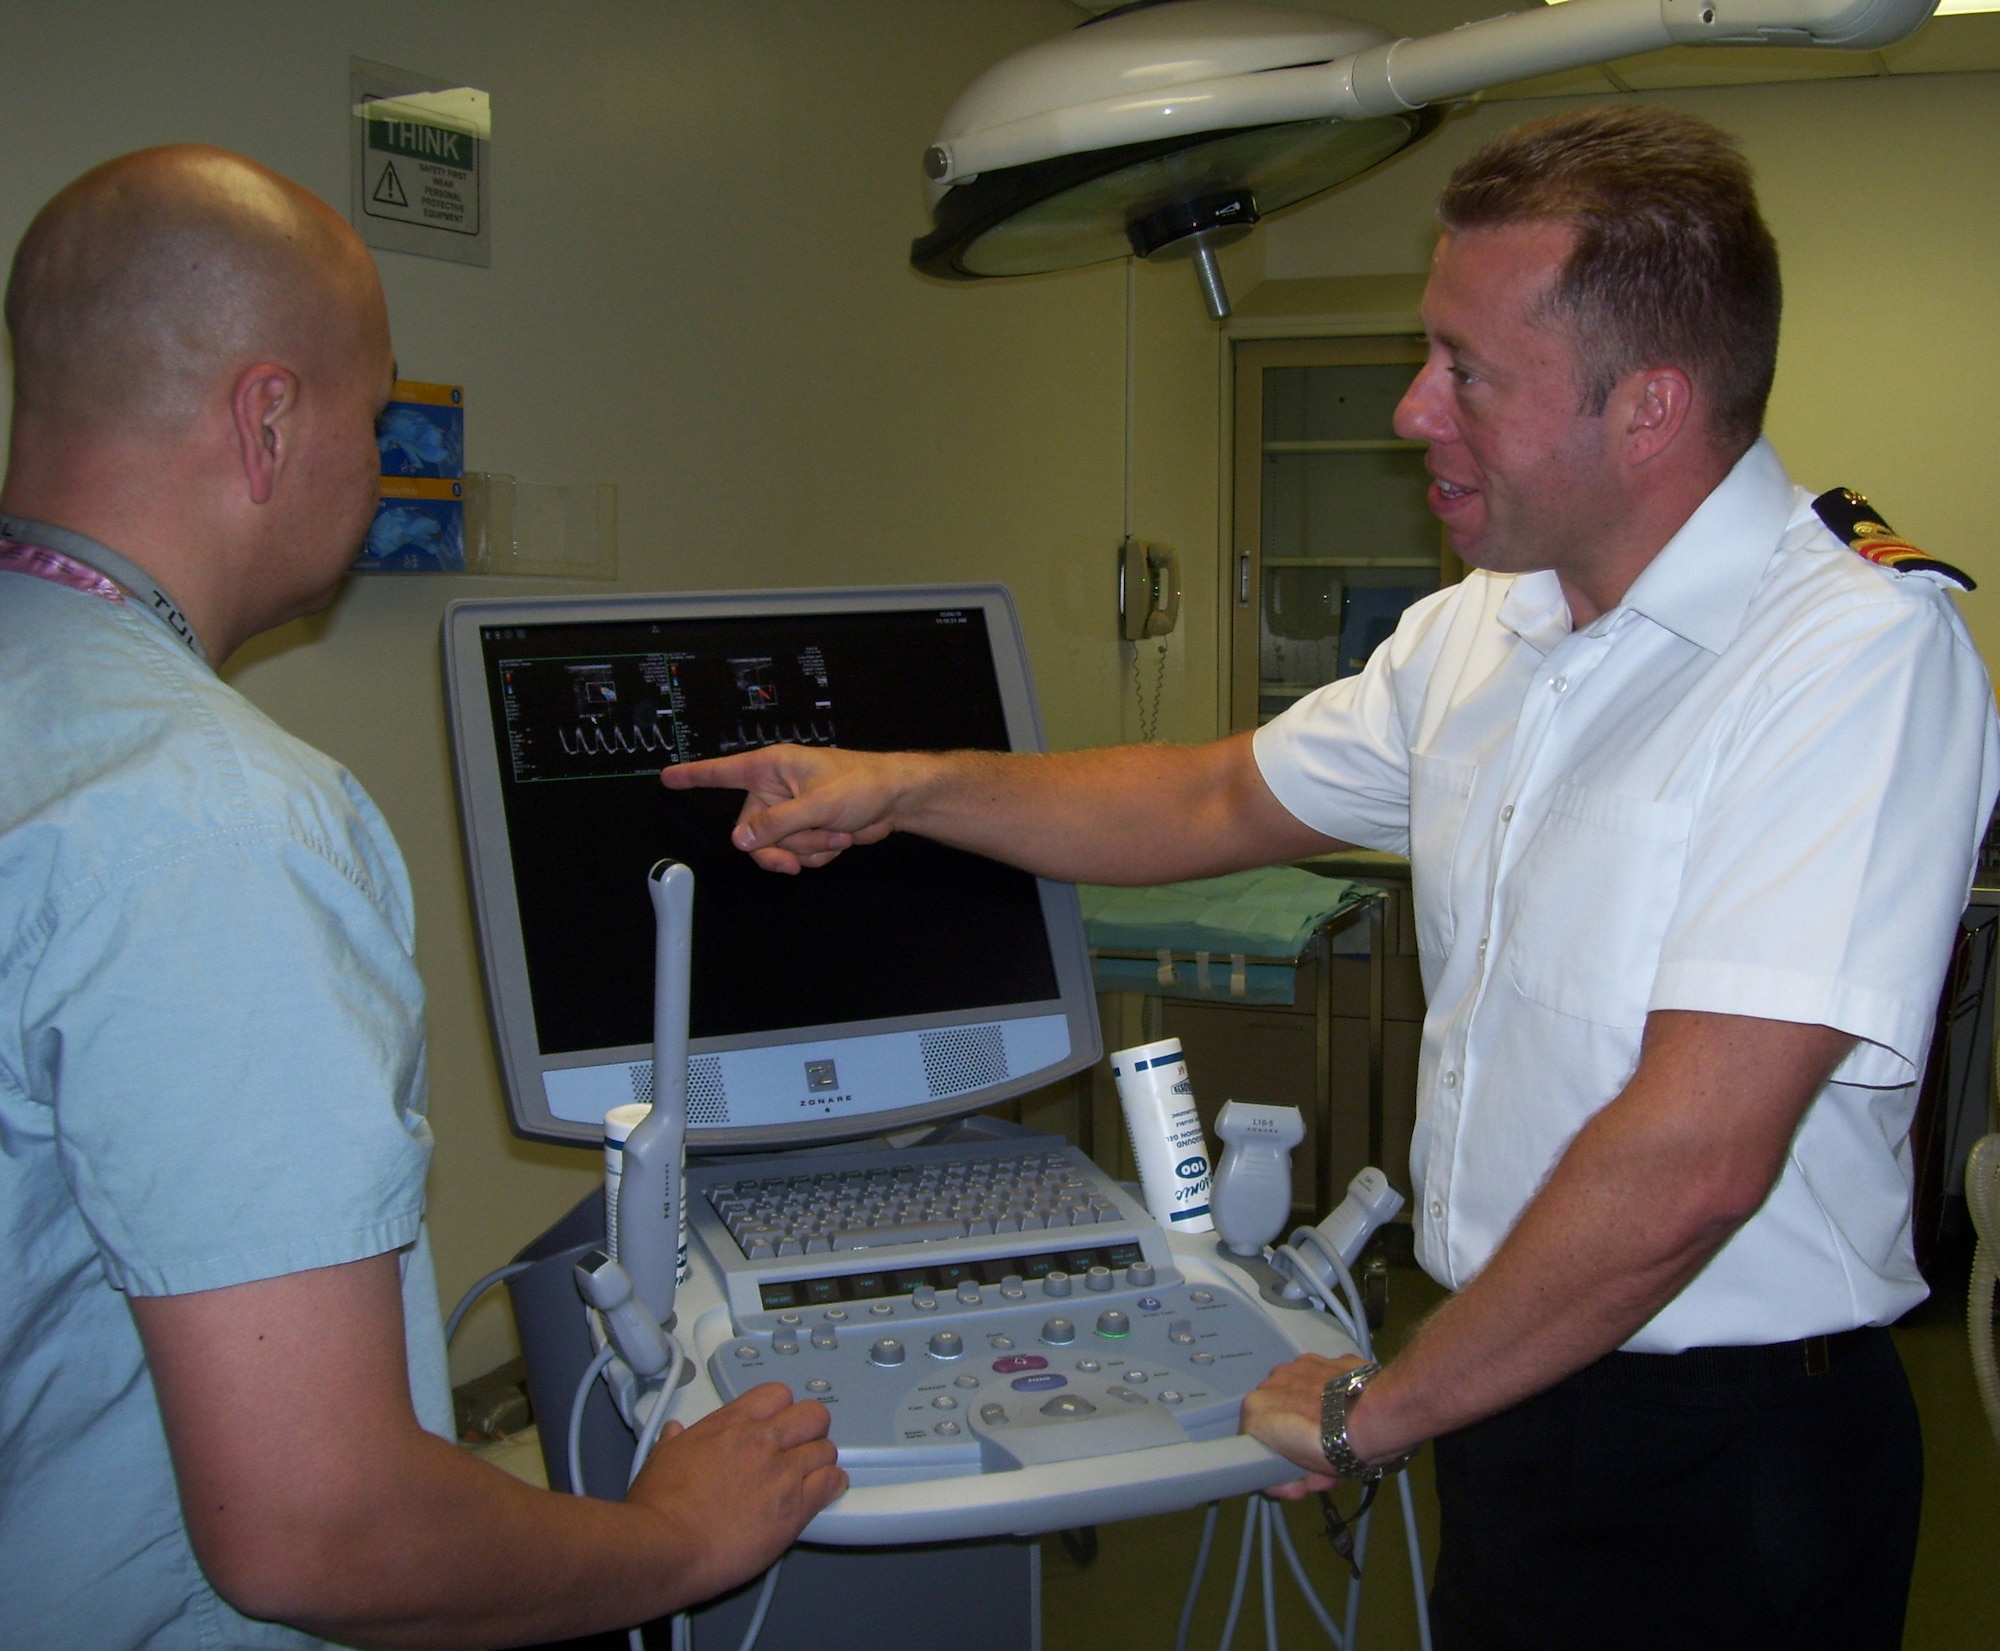 Surgeon Lt. Commander Adam Stannard, Royal Navy (right), discusses blood flow on an ultrasound machine with Mike Goedecke, biological lab assistant, in the Clinical Research building, Lackland Air Force Base, Texas, May 6. Commander Stannard, a fellow in the Academic Department of Military Surgery and Trauma, Royal Centre for Defence Medicine, Birmingham, U.K., has joined a 59th Medical Wing research team for one year to investigate vascular surgery techniques following battlefield trauma.